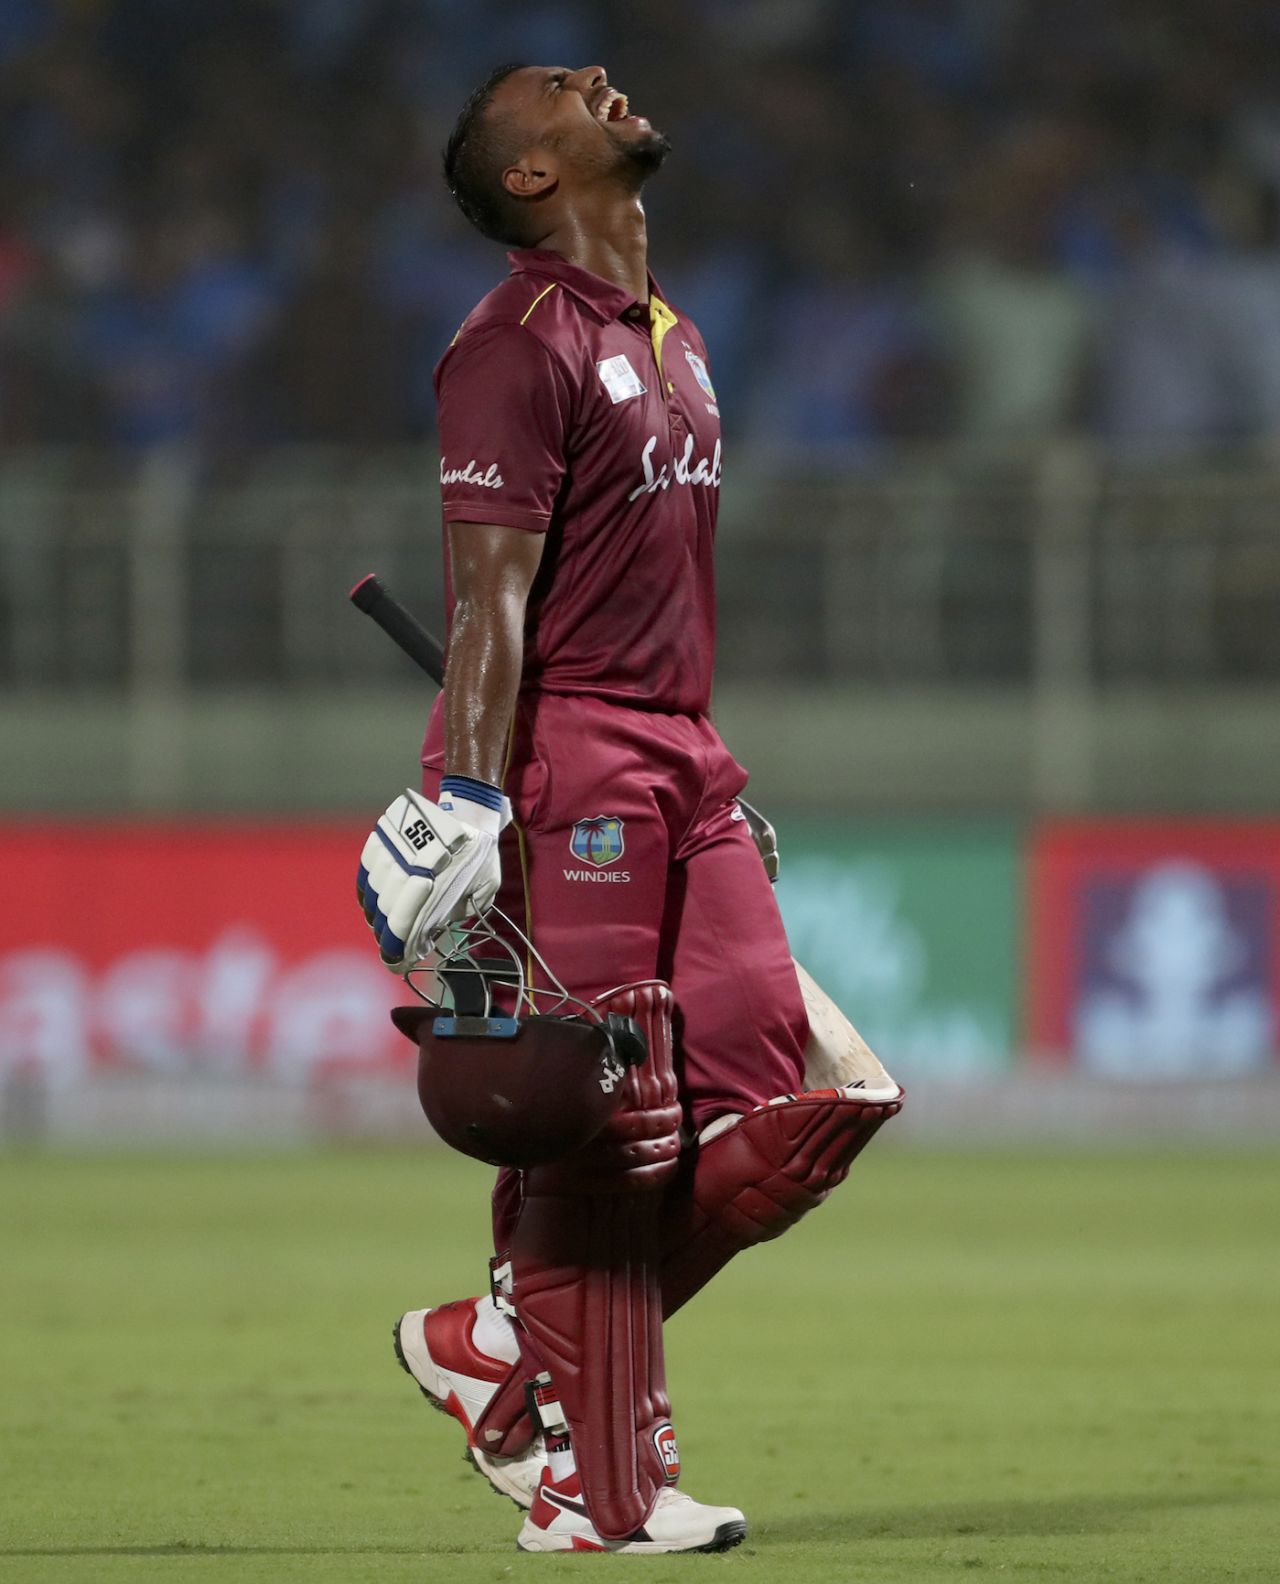 Nicholas Pooran is dejected after falling for a rapid fifty, India v West Indies, 2nd ODI, Visakhapatnam, December 18, 2019